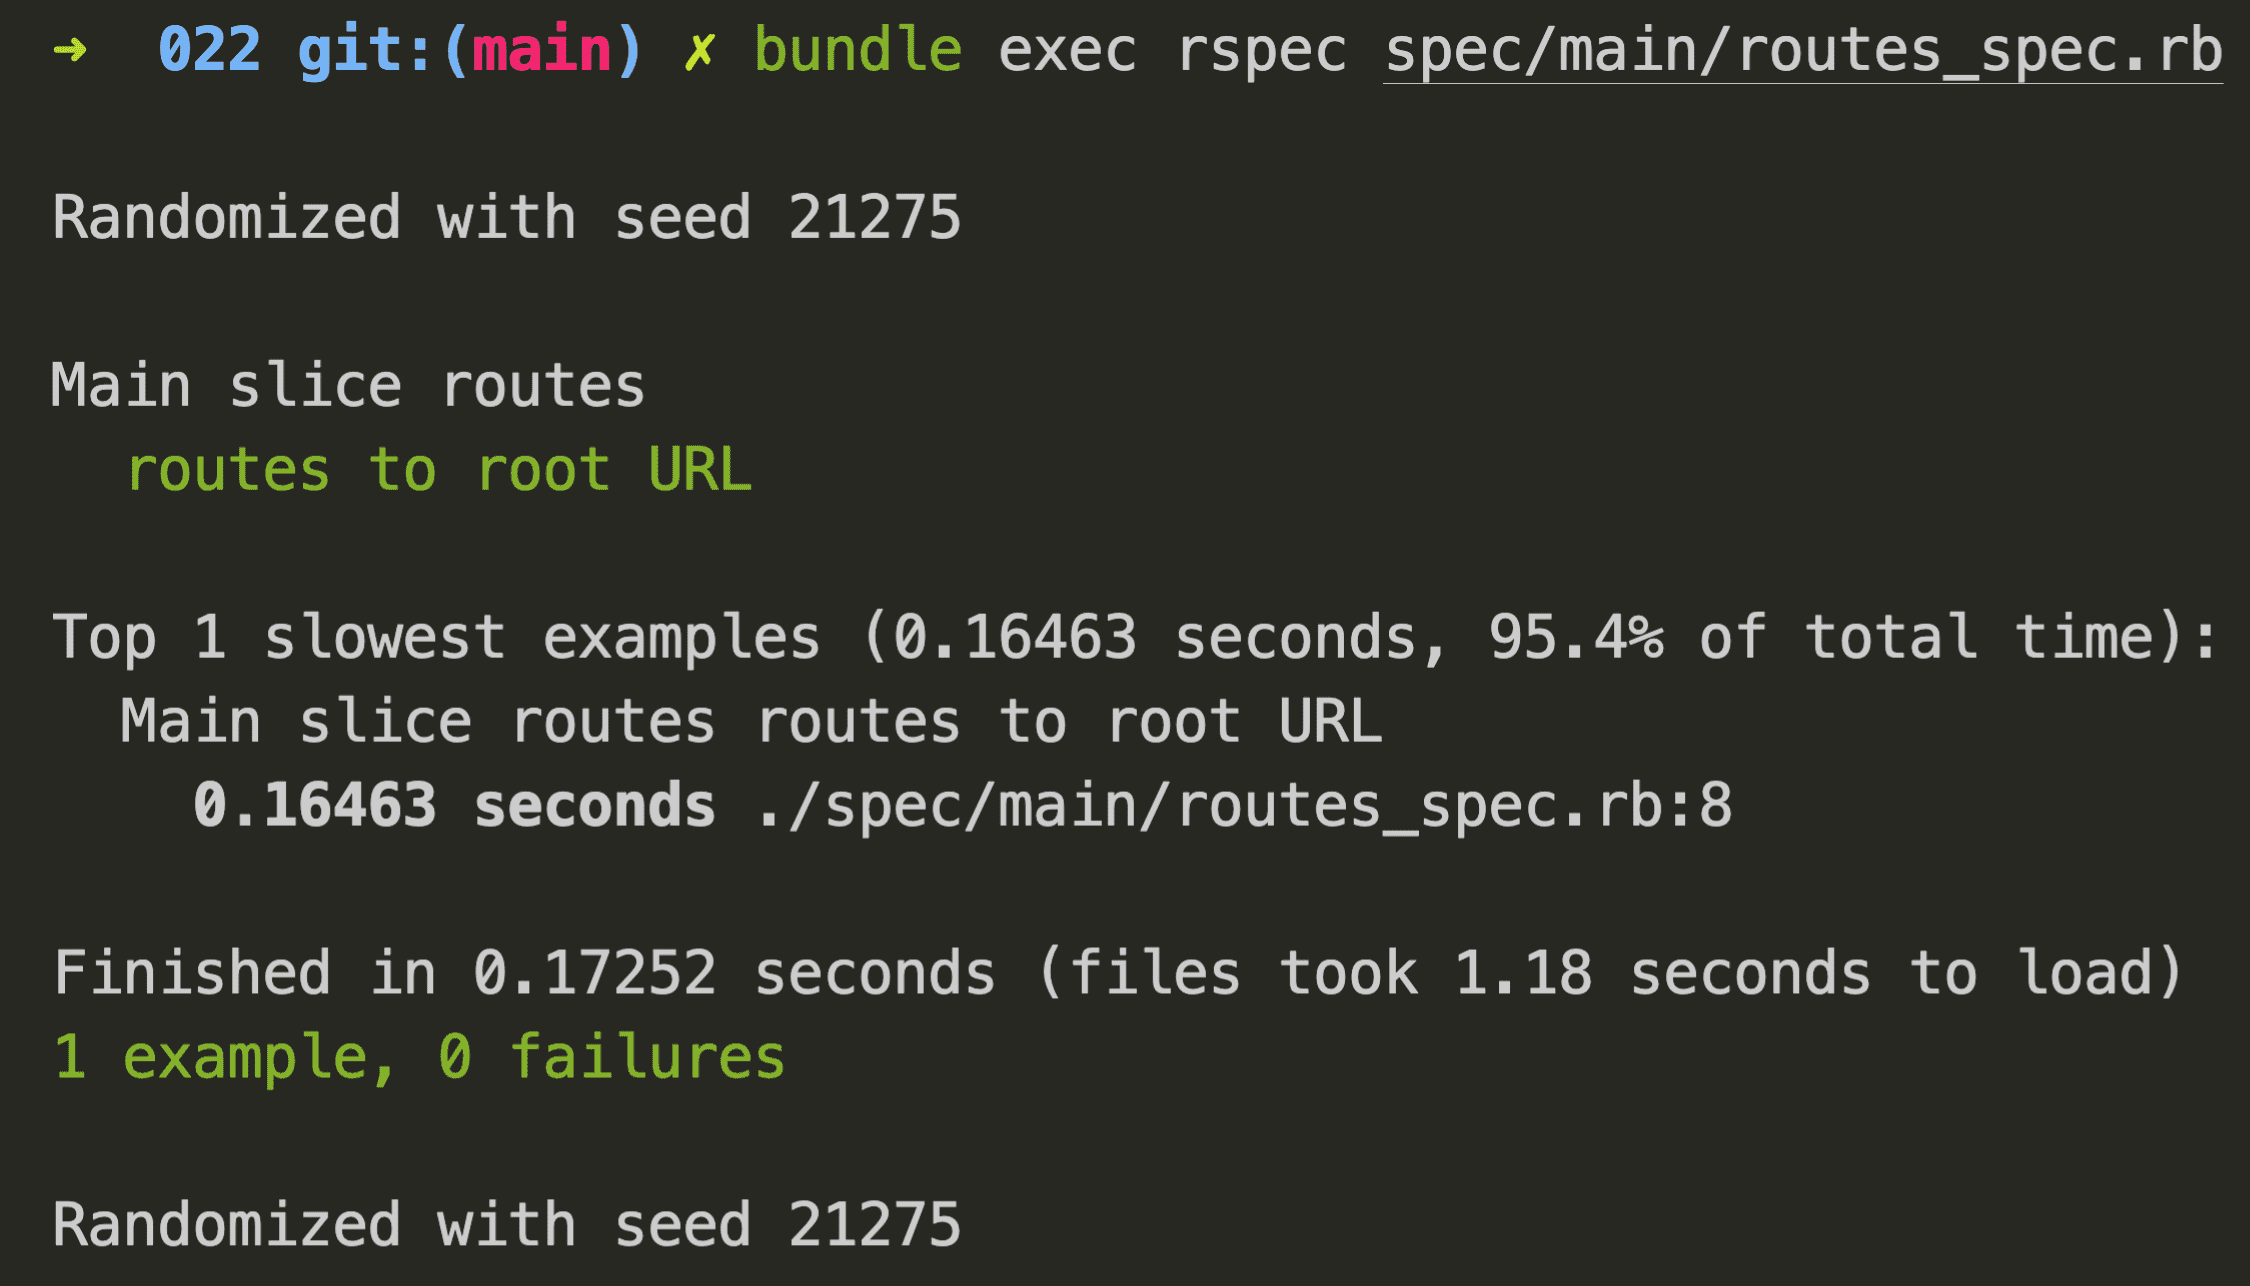 Passing root path generation test